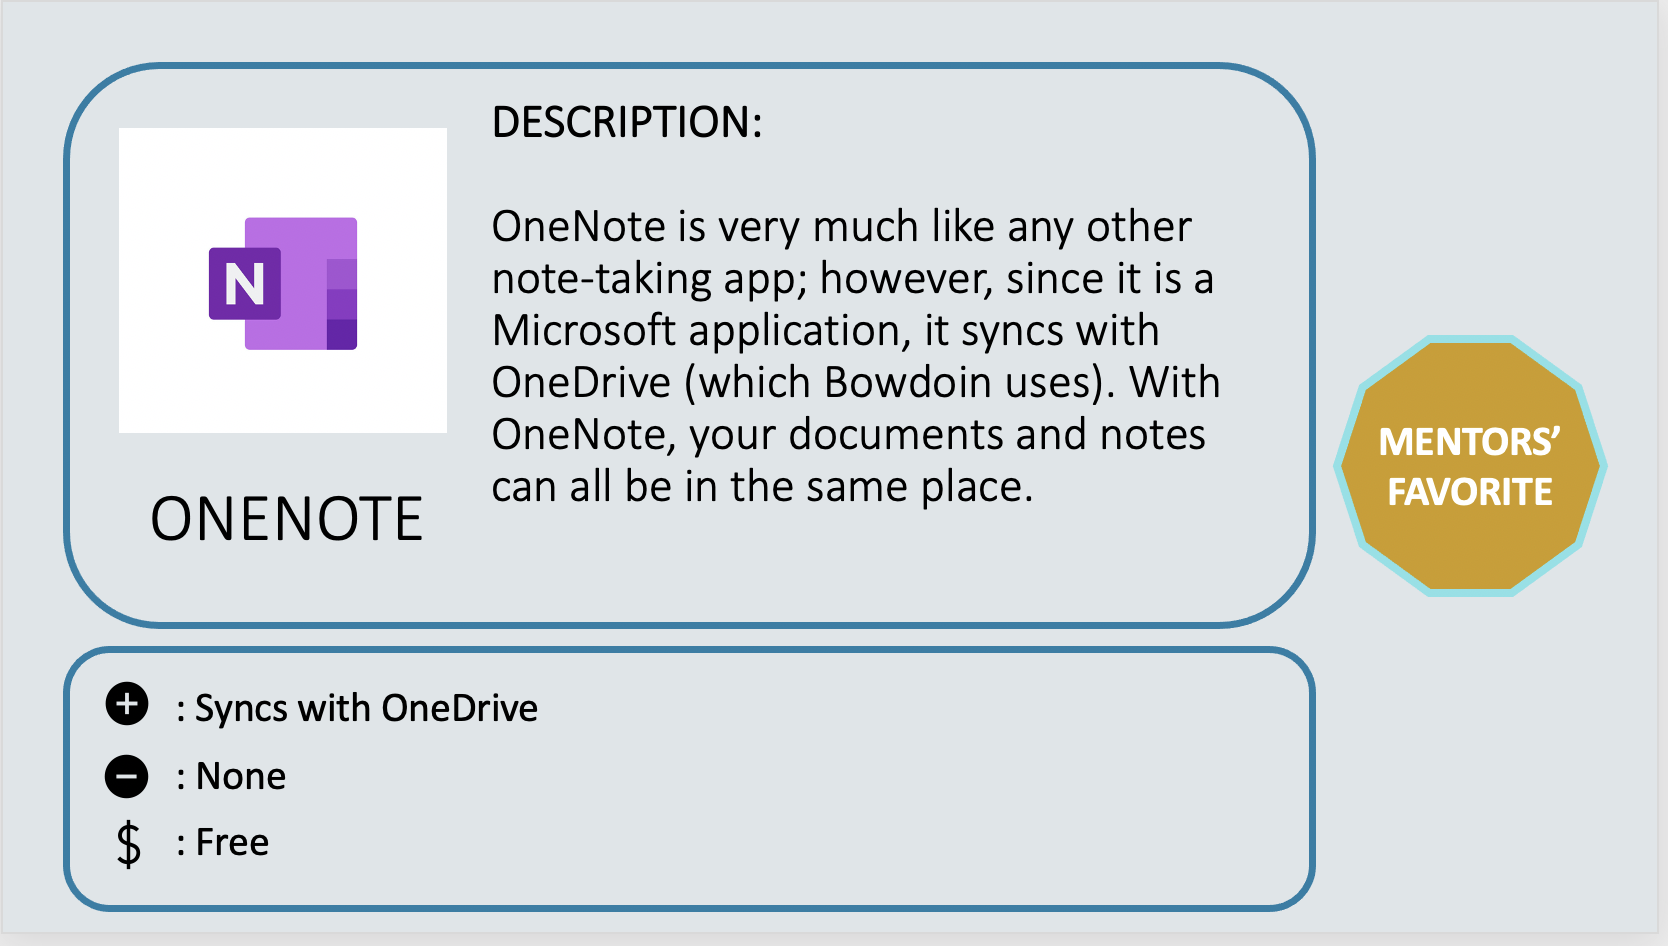 ONENOTE – Mentor Favorite - OneNote is very much like any other note-taking app; however, since it is a Microsoft application, it syncs with OneDrive (which Bowdoin uses). With OneNote, your documents and notes can all be in the same place. Positive: Syncs with OneDrive. Negative: None. Cost: Free.